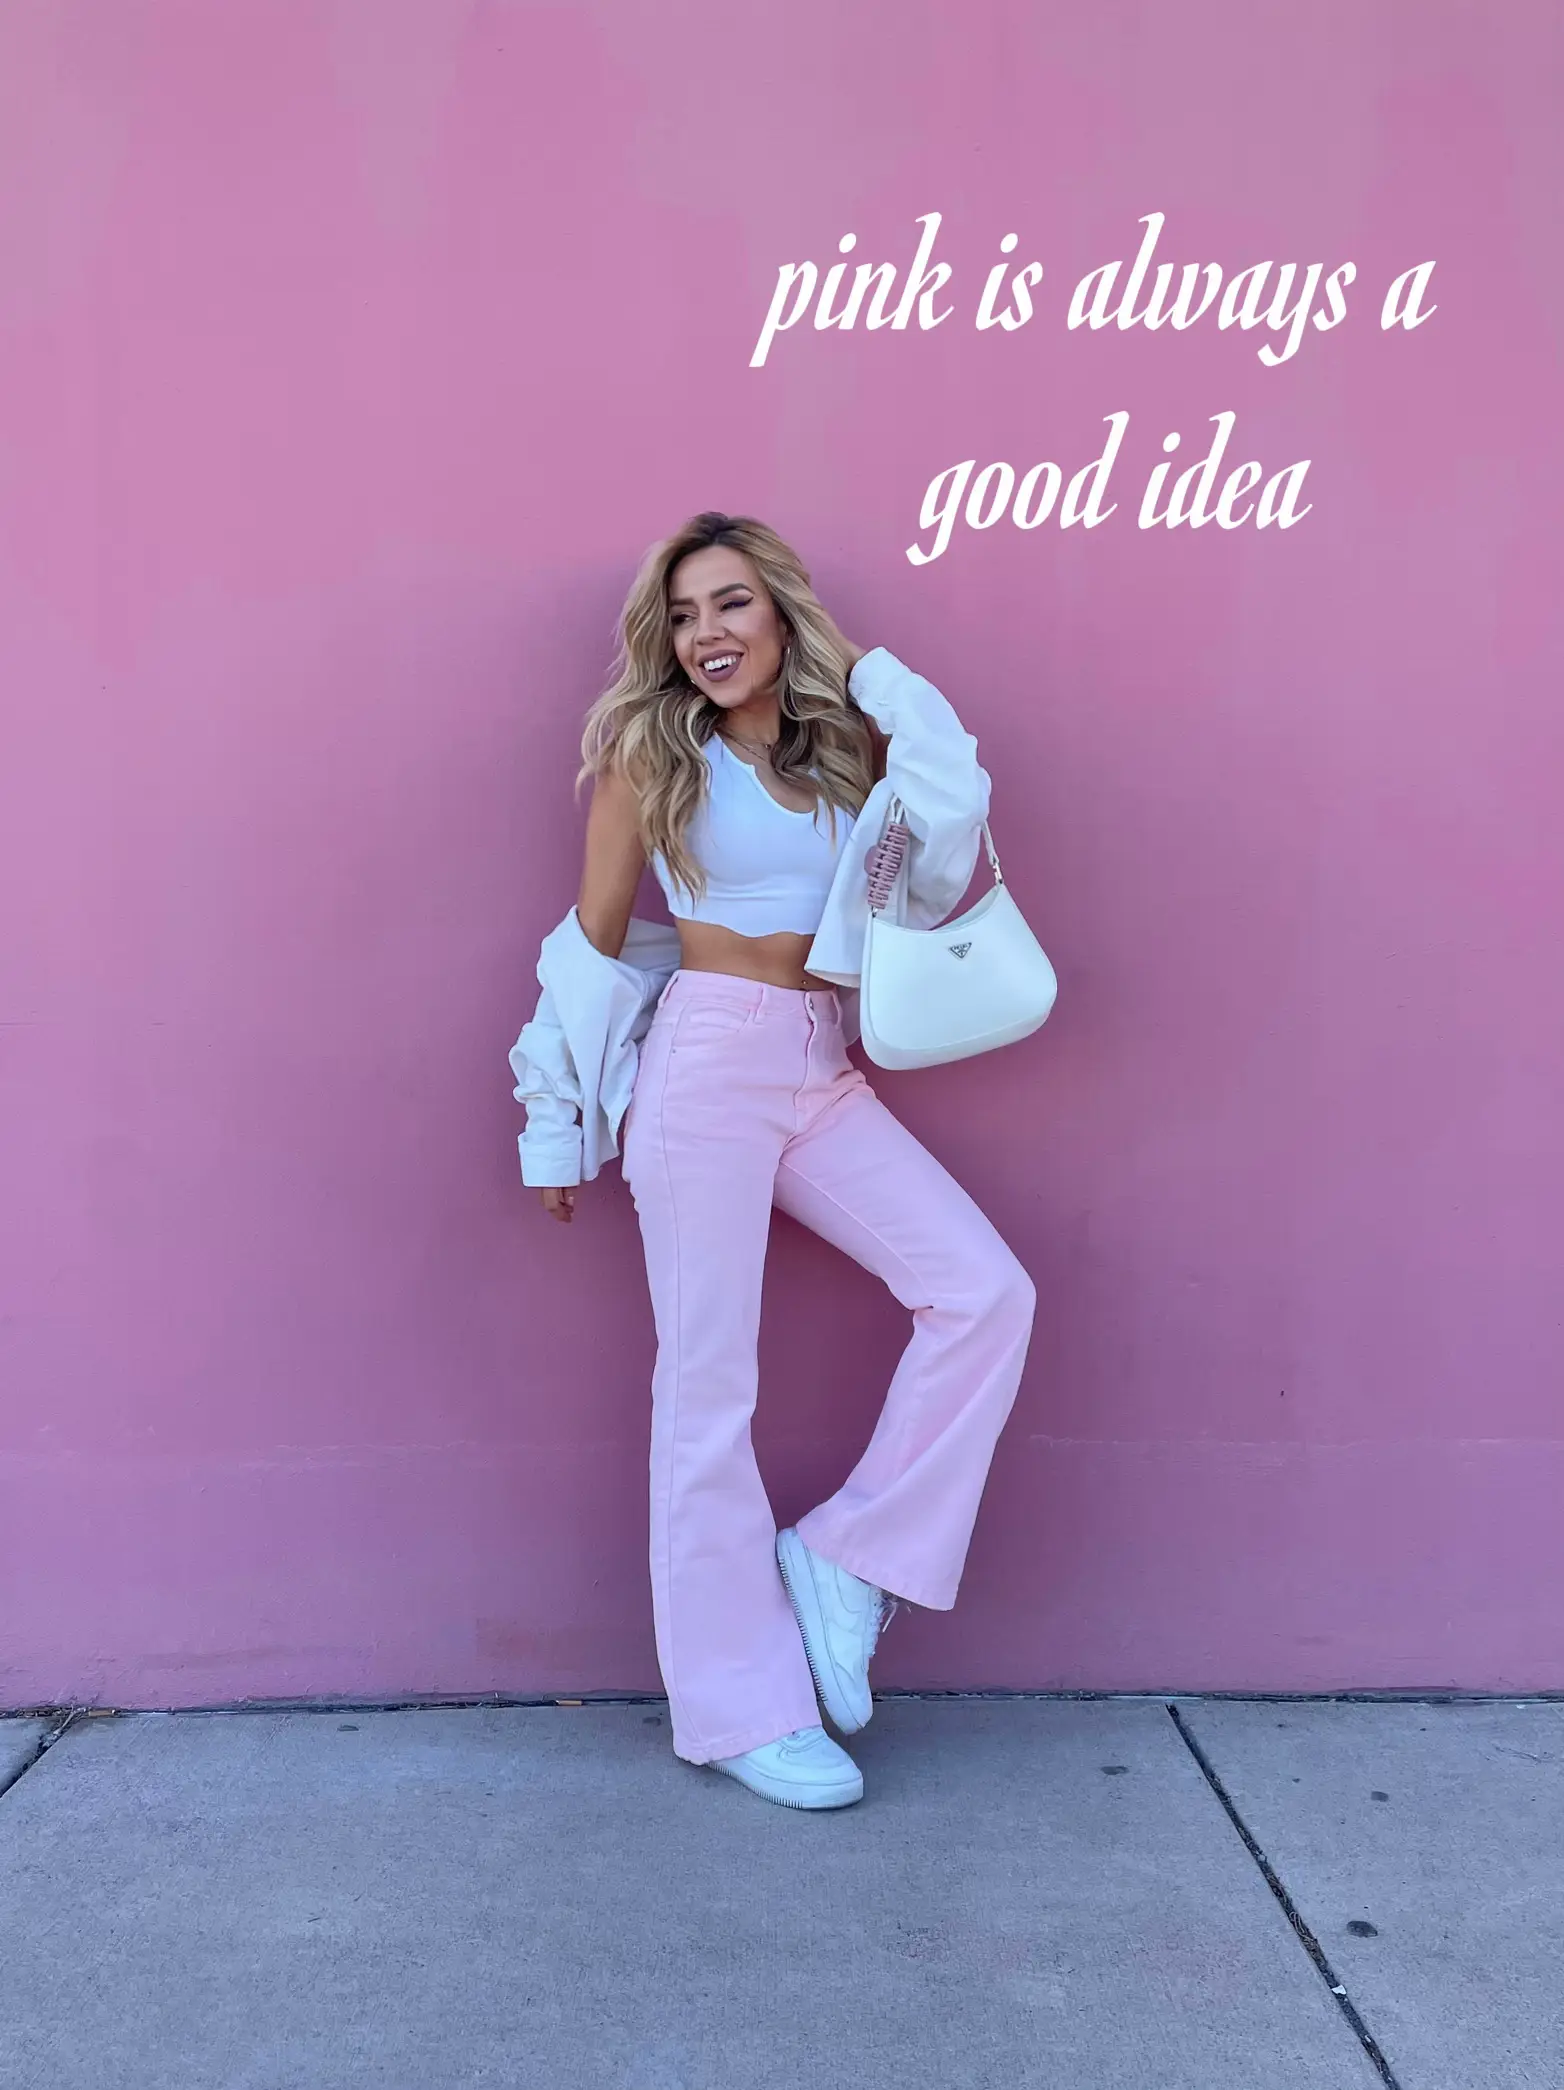 Swept Away With You Taupe Tailored Wide Leg Pants SALE – Pink Lily